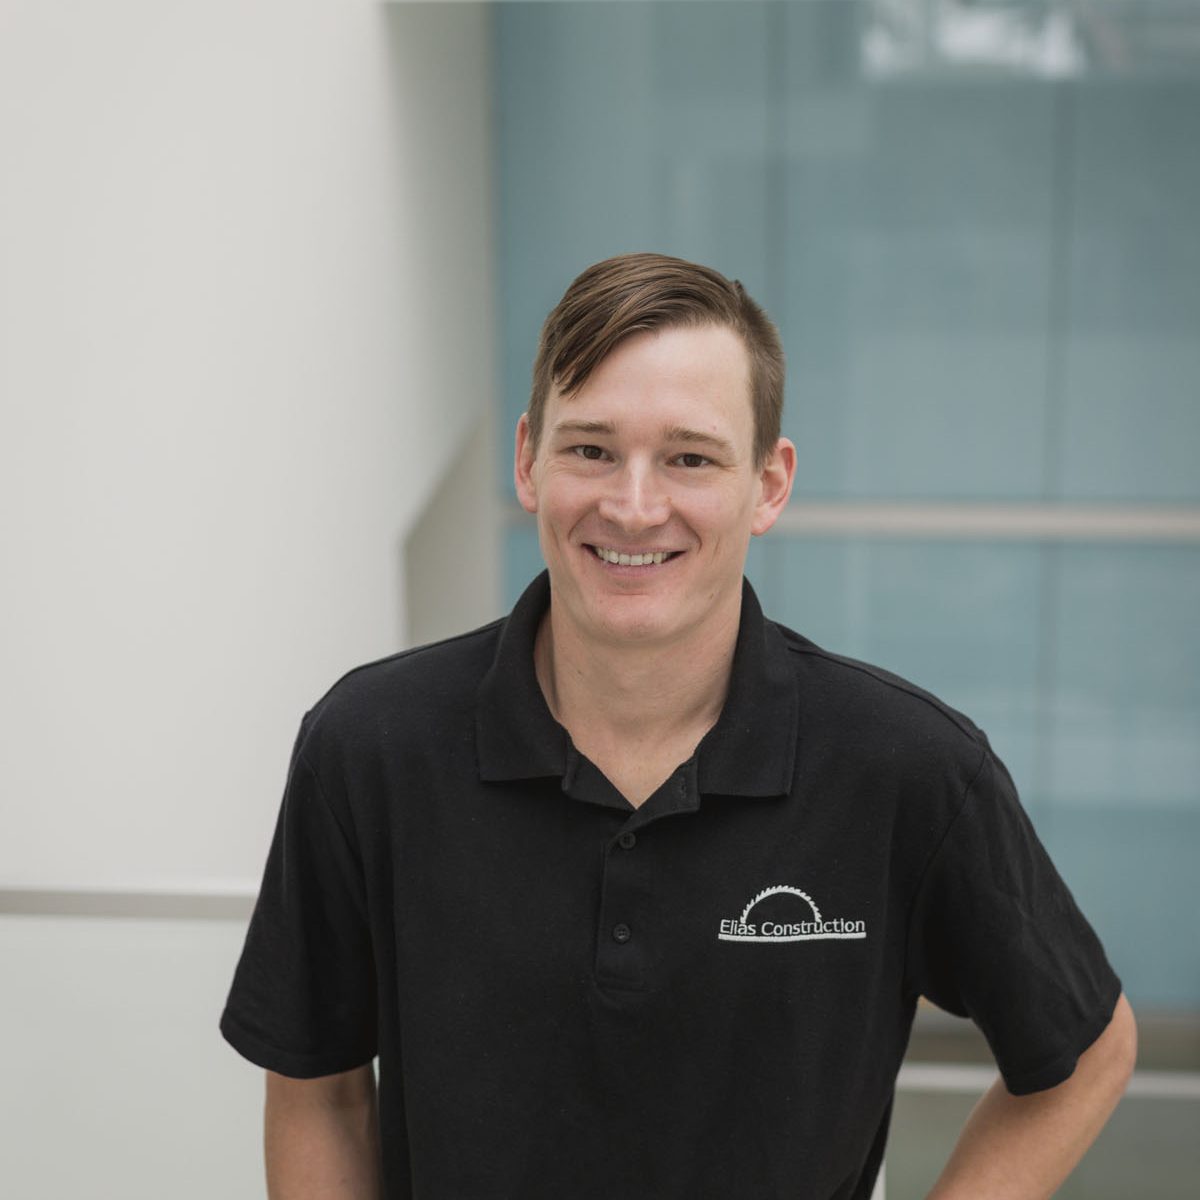 Anton graduated from St. Cloud University in 2016 with a degree in Construction Management
and then joined Elias Construction in 2019. In his free time, Anton spends time with his wife
Tessa and their two dogs, Luna and Milo. Together they love biking, camping, golfing, and
playing yard games at home. Anton also enjoys traveling to new destinations and working on
house projects to update his own home.